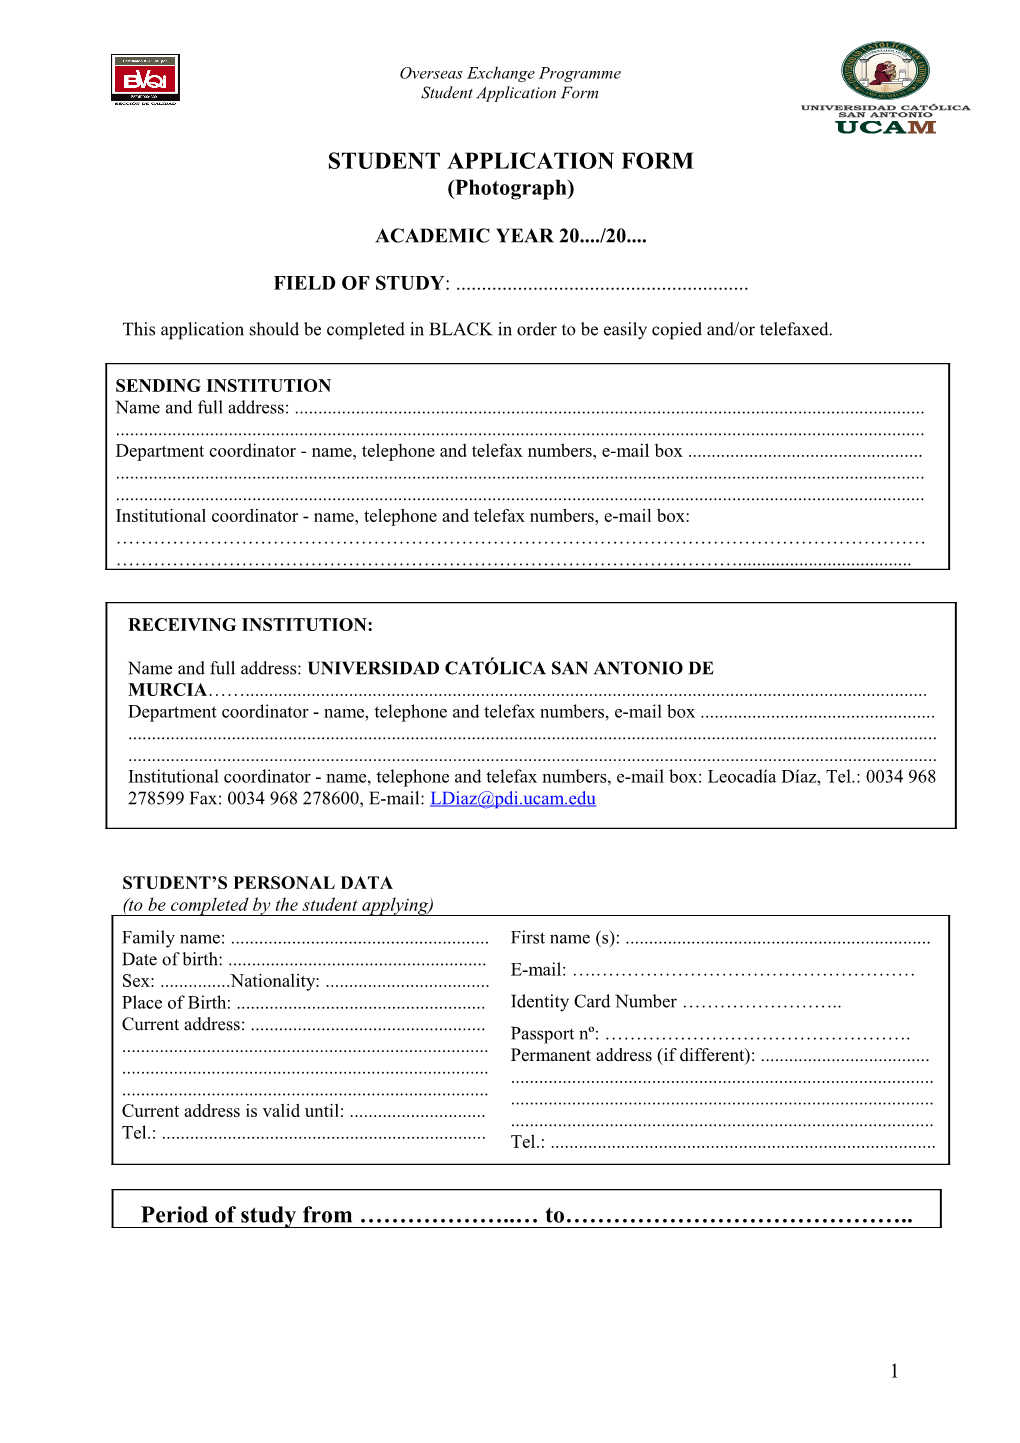 Student Application Form s4